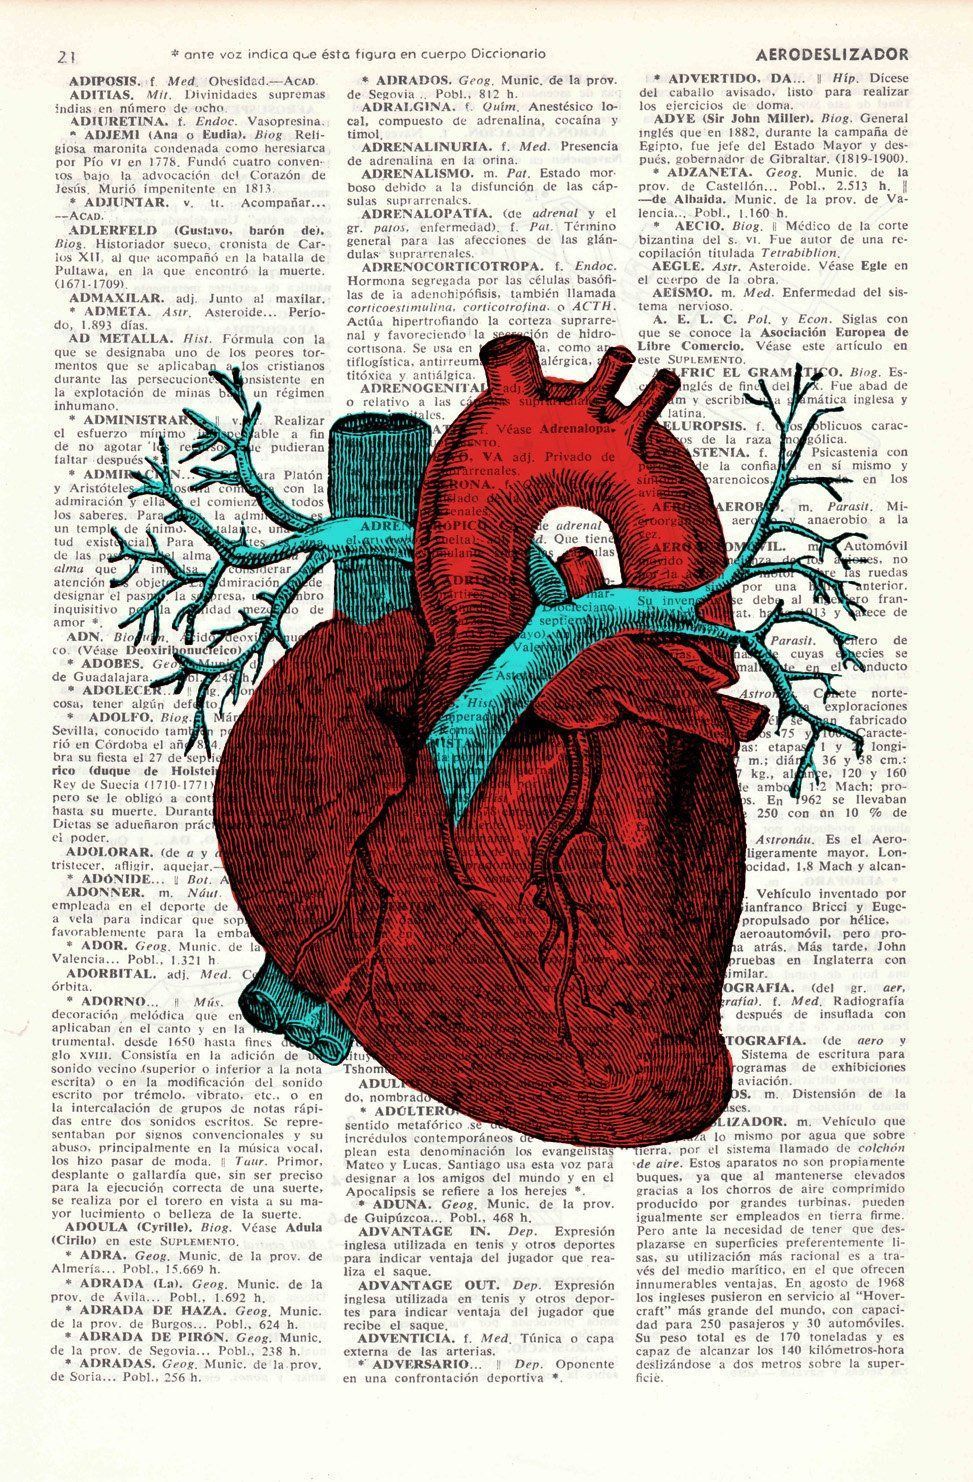 A print of a red human heart on a dictionary page - Anatomy, medical